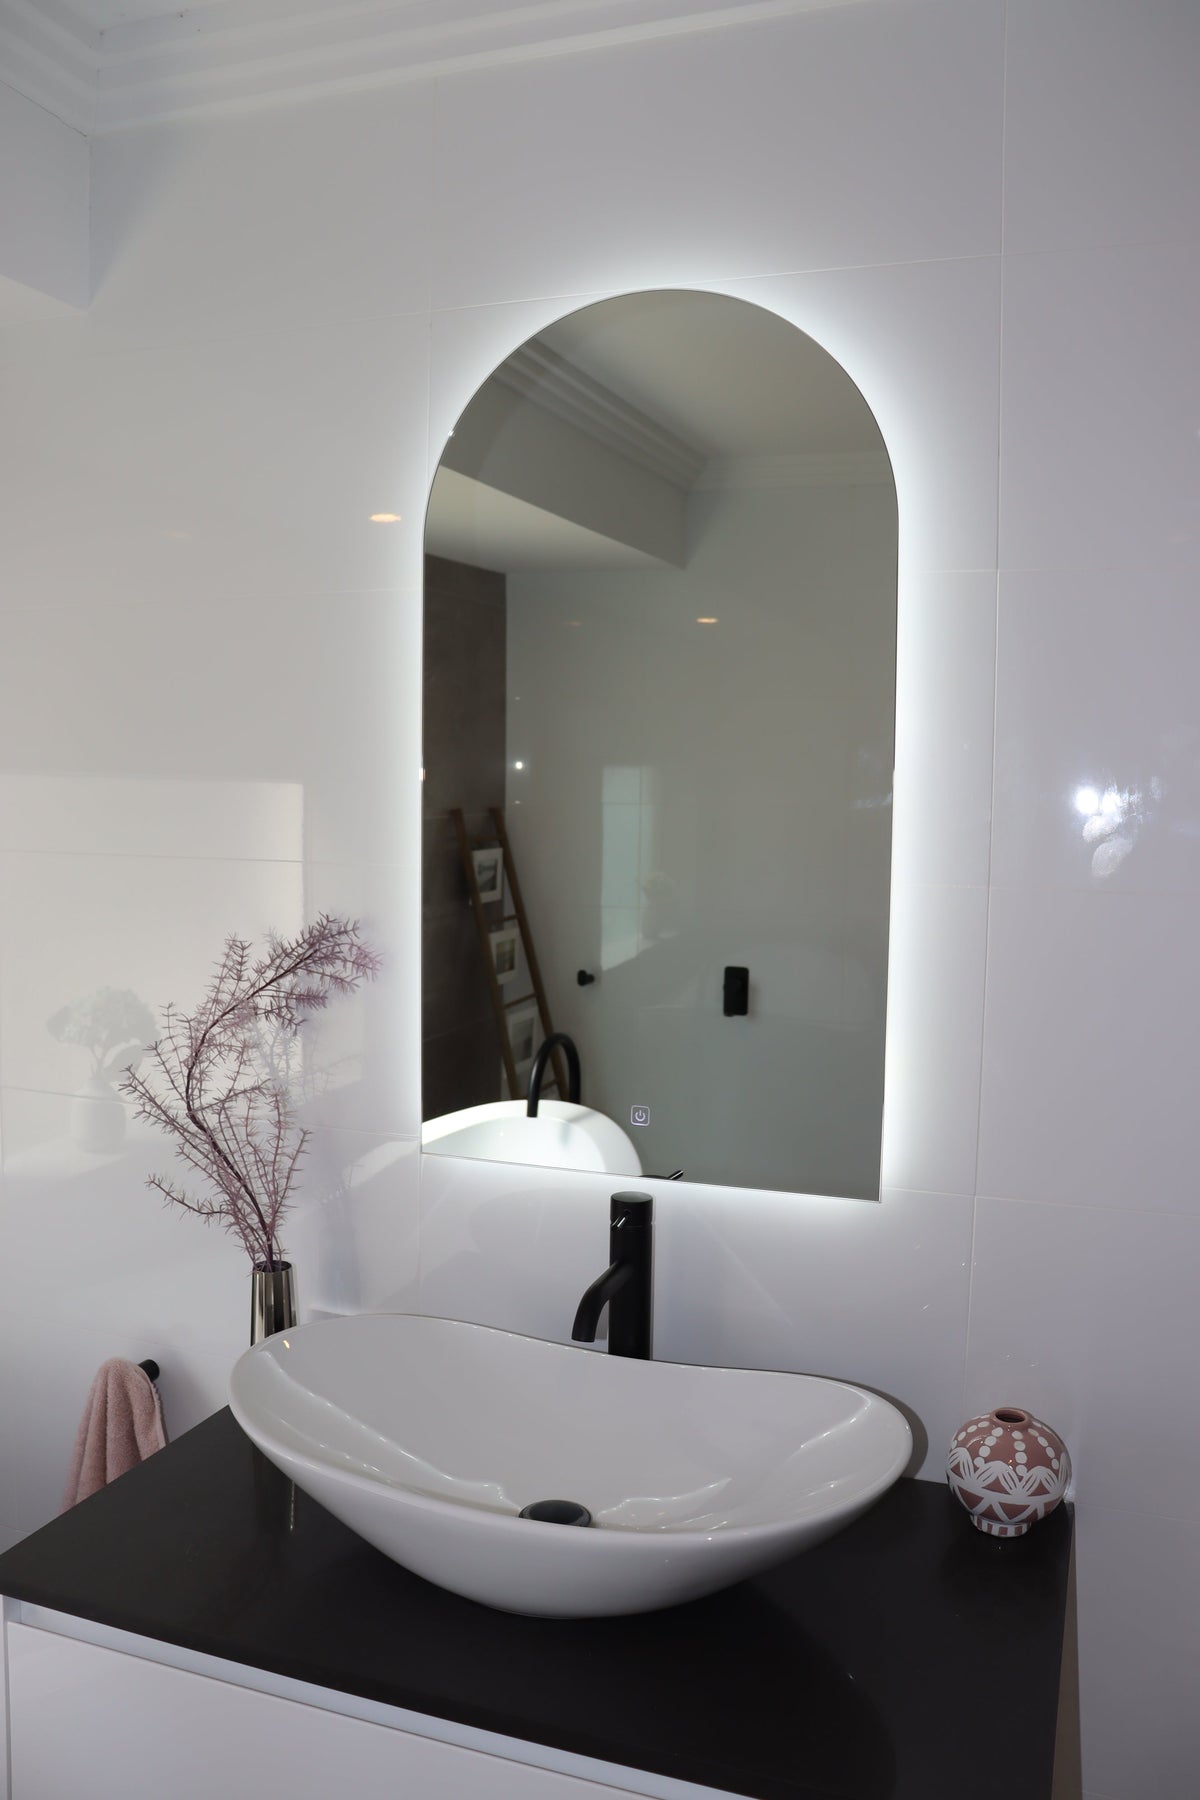 Elegant Curved LED Mirror Illuminating White Shiny Tiles and Black Countertop with White Vessel Sink